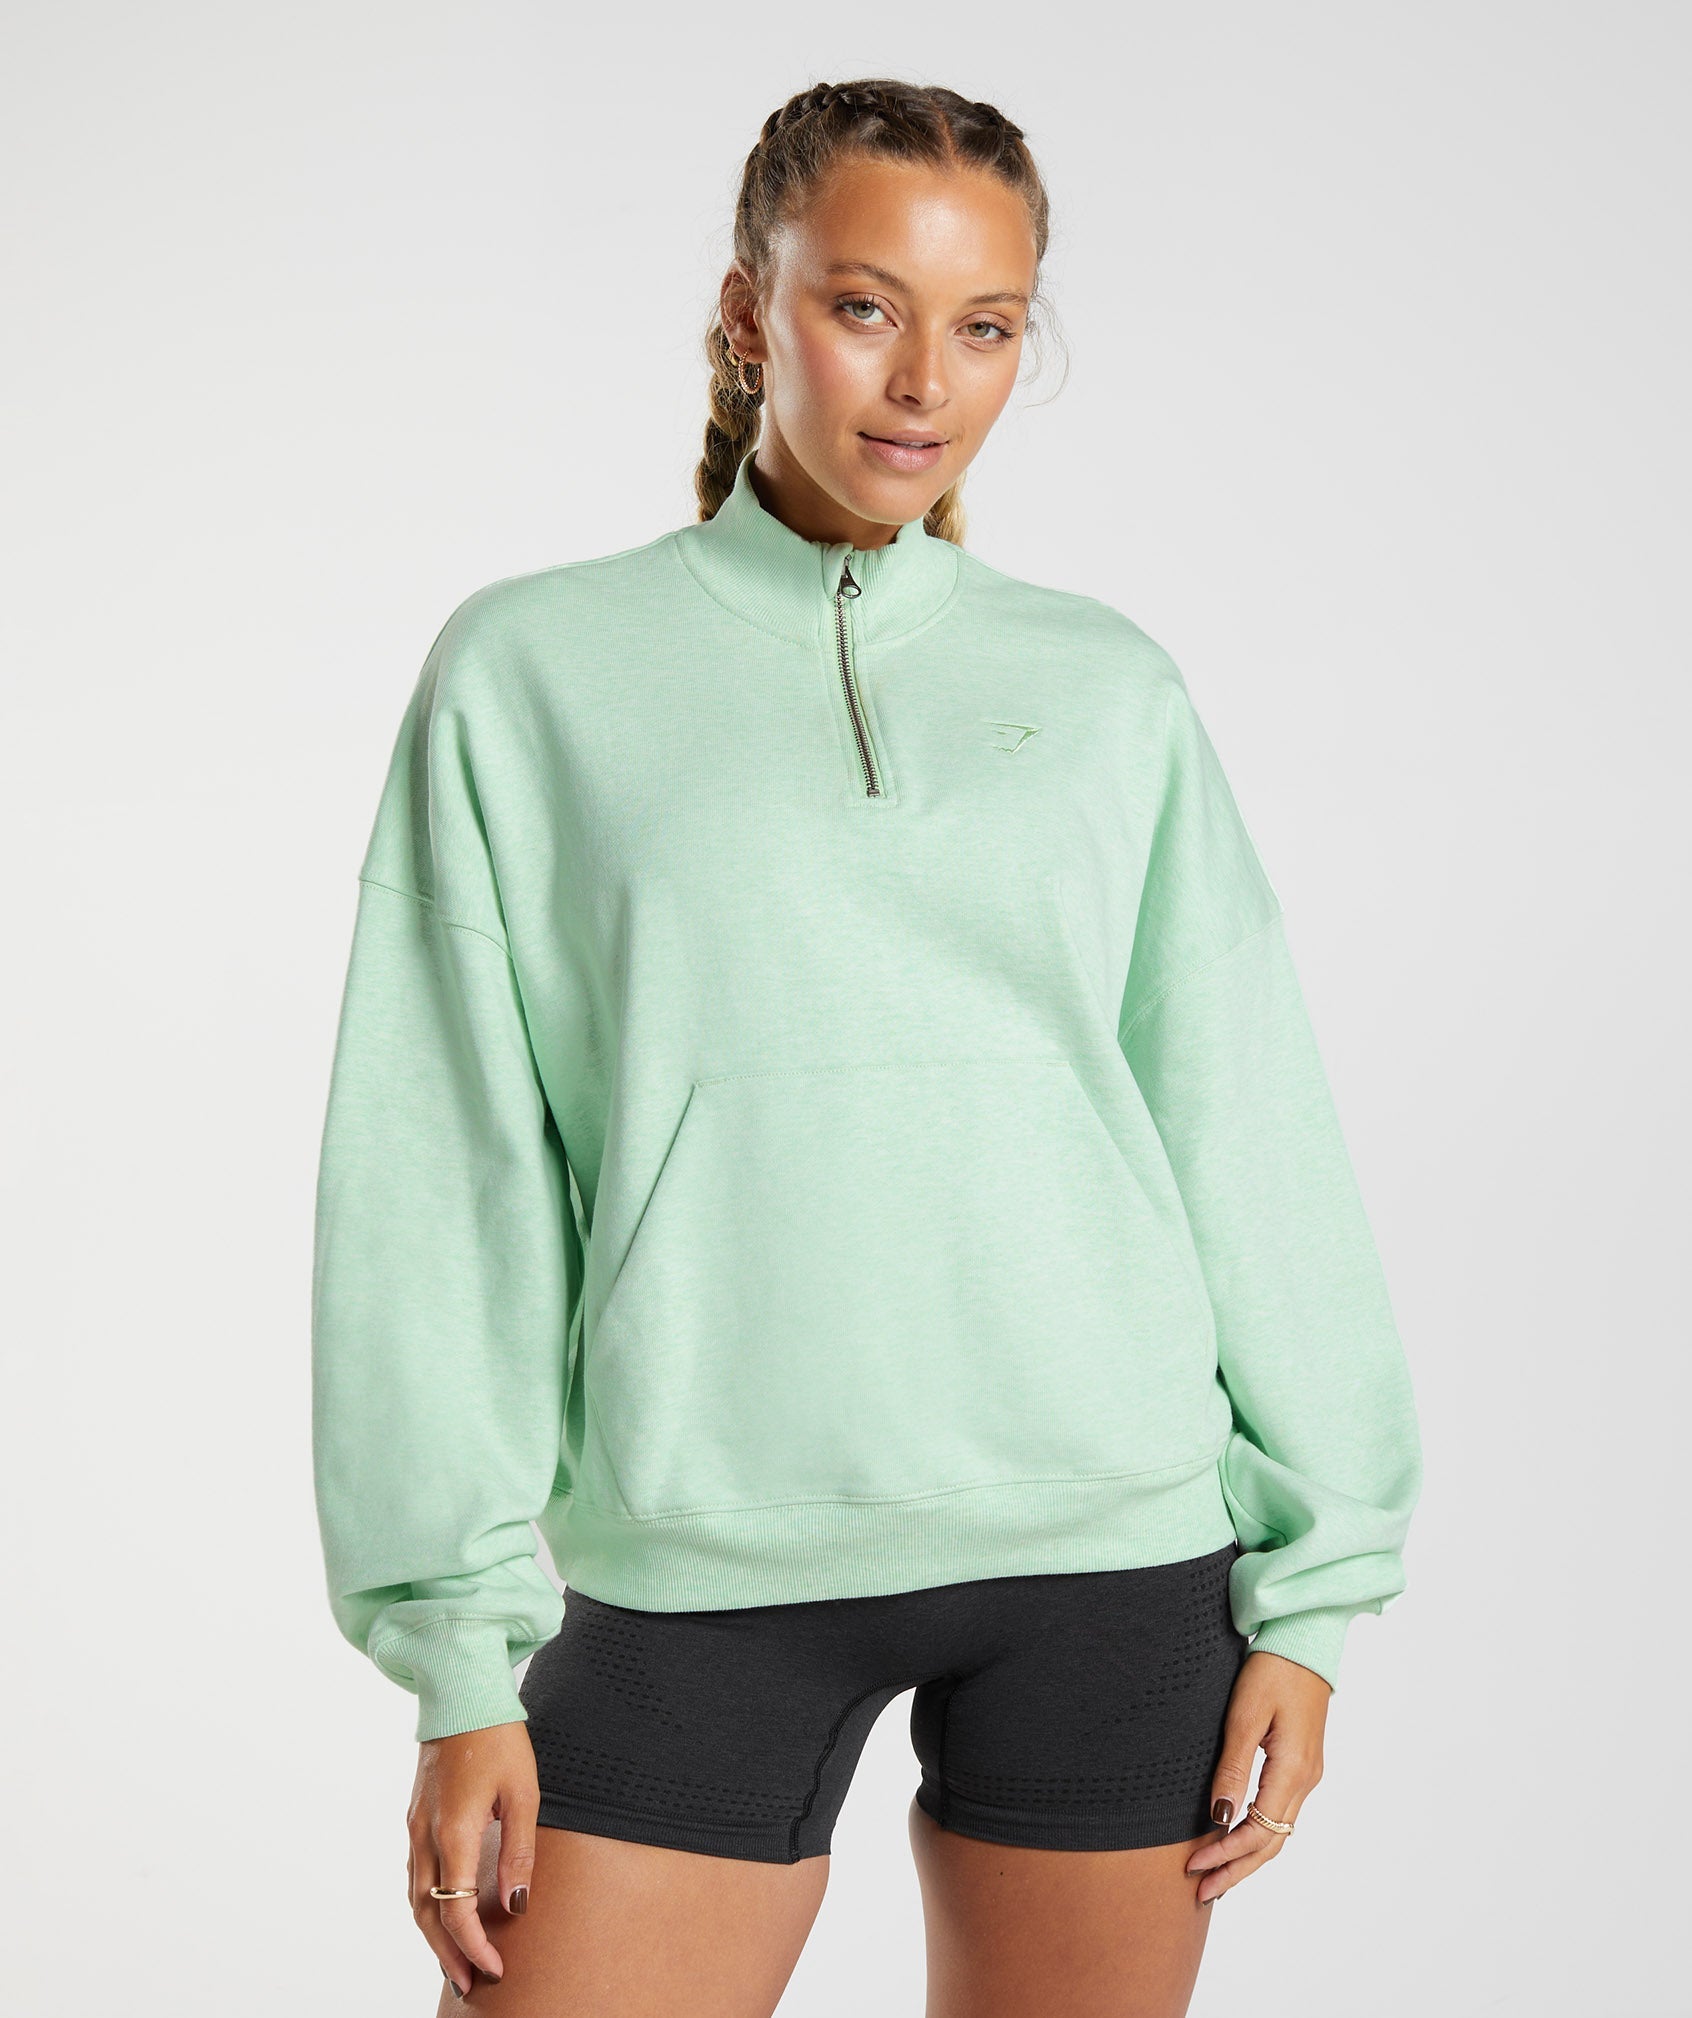 Rest Day Sweats 1/2 Zip Pullover in Refreshing Green Marl - view 2